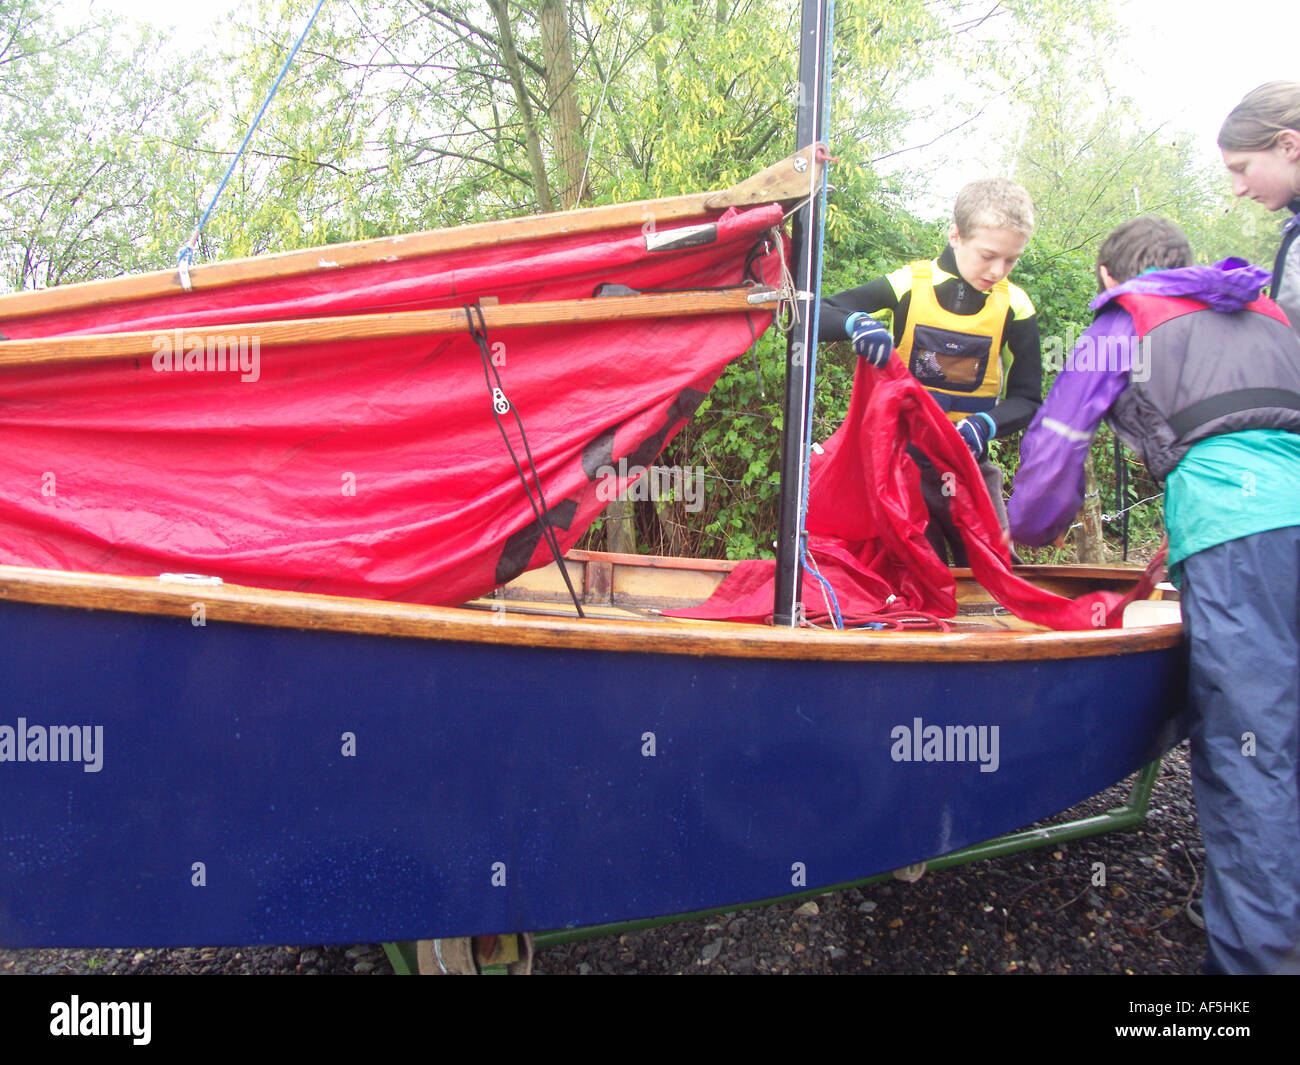 Two children boy and girl preparing their mirror sailing boat Stock Photo